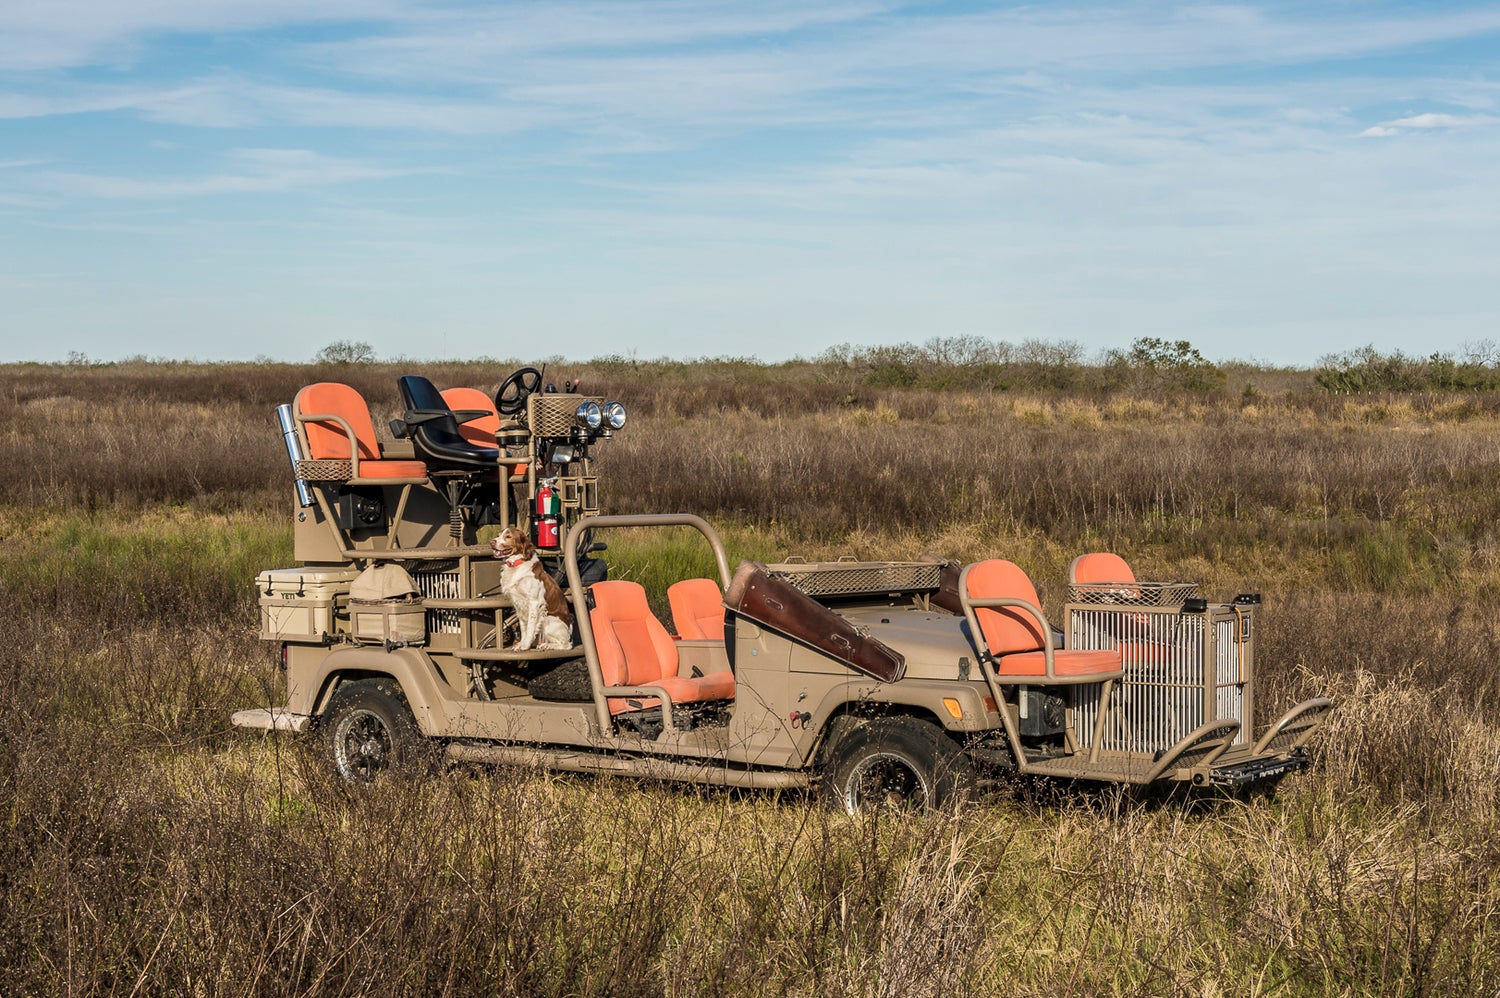 These Are The Insane Trucks Texans Use To Hunt Birds